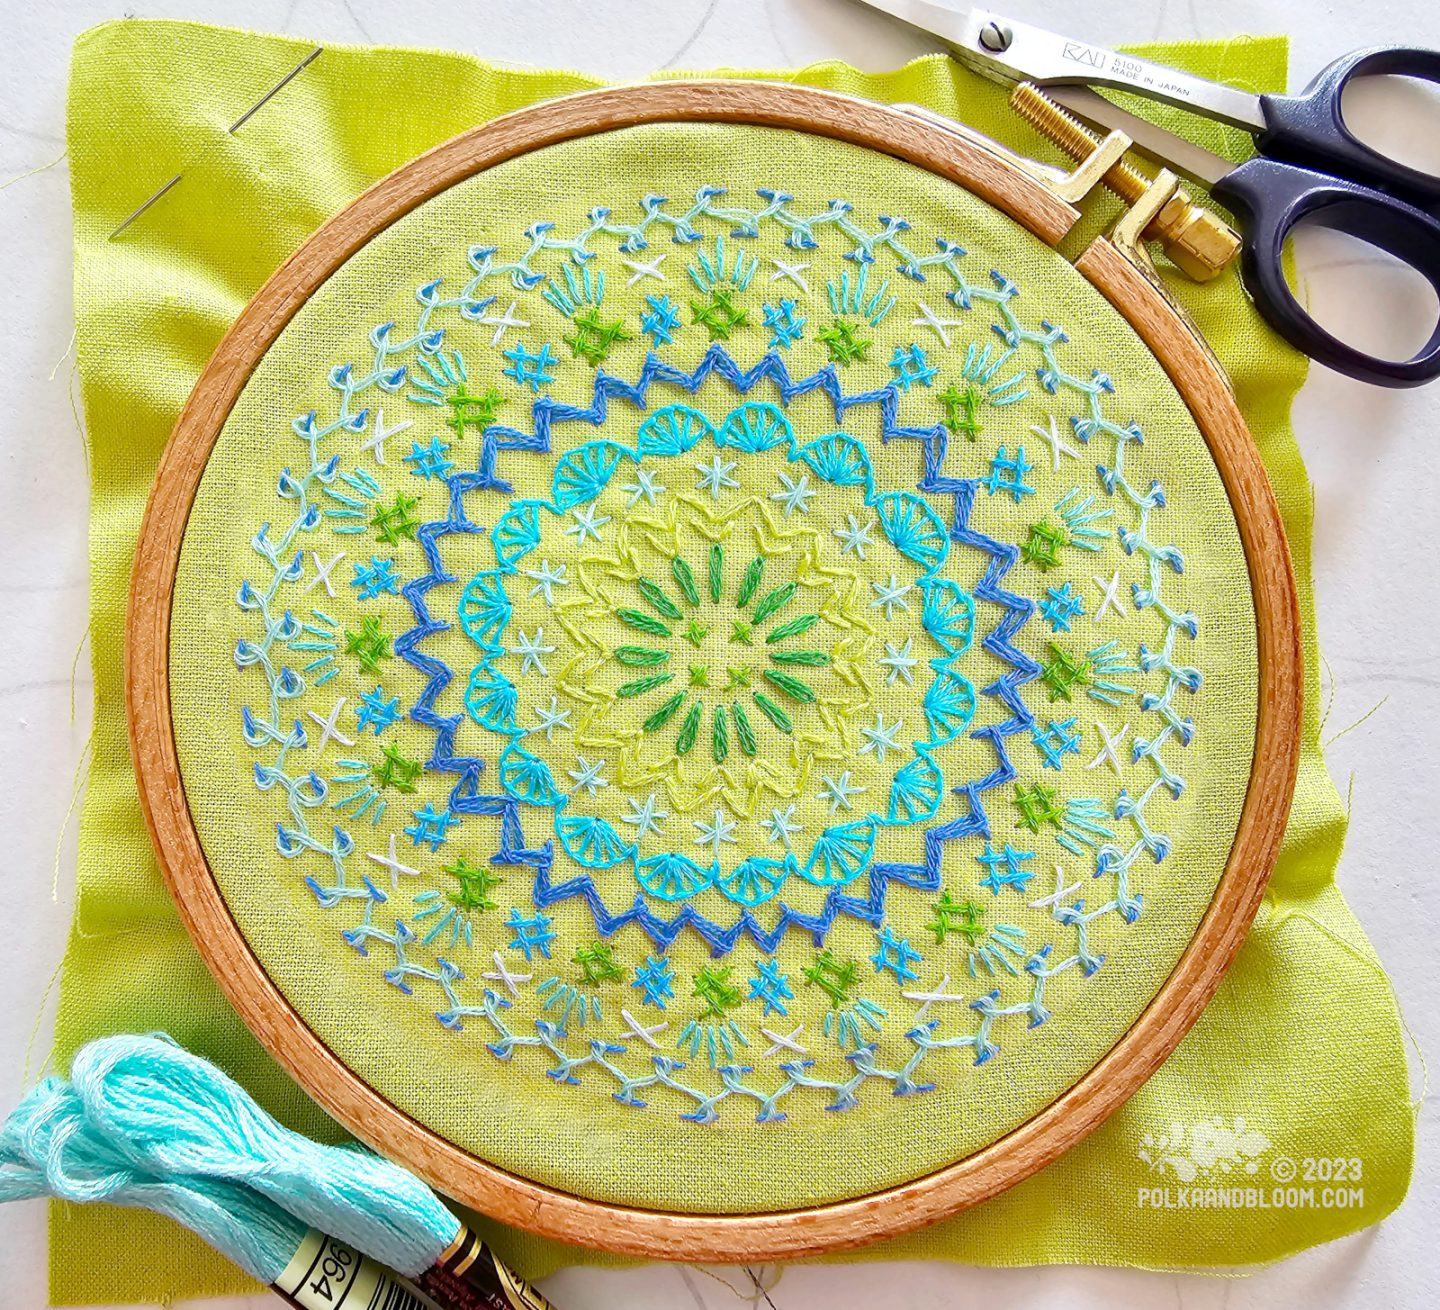 Overhead view of a mandala inspired embroidery worked in blue and green colours on lime green fabric.